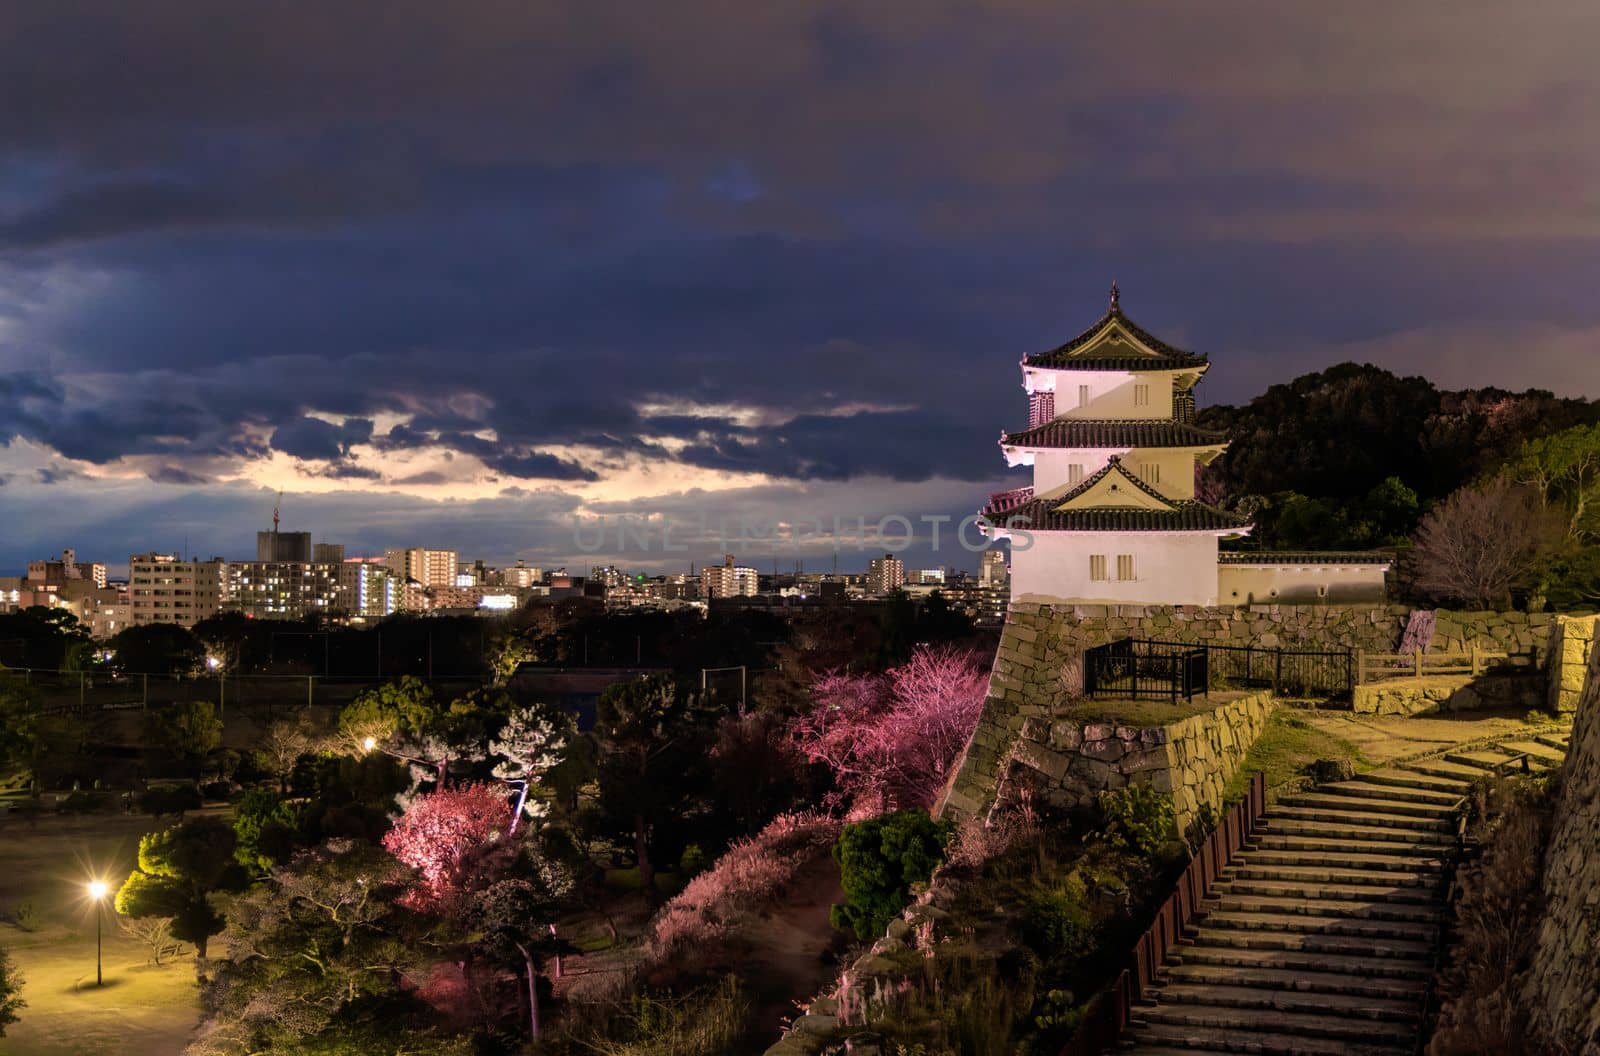 Ancient watchtower over castle grounds lit up after sunset by Osaze